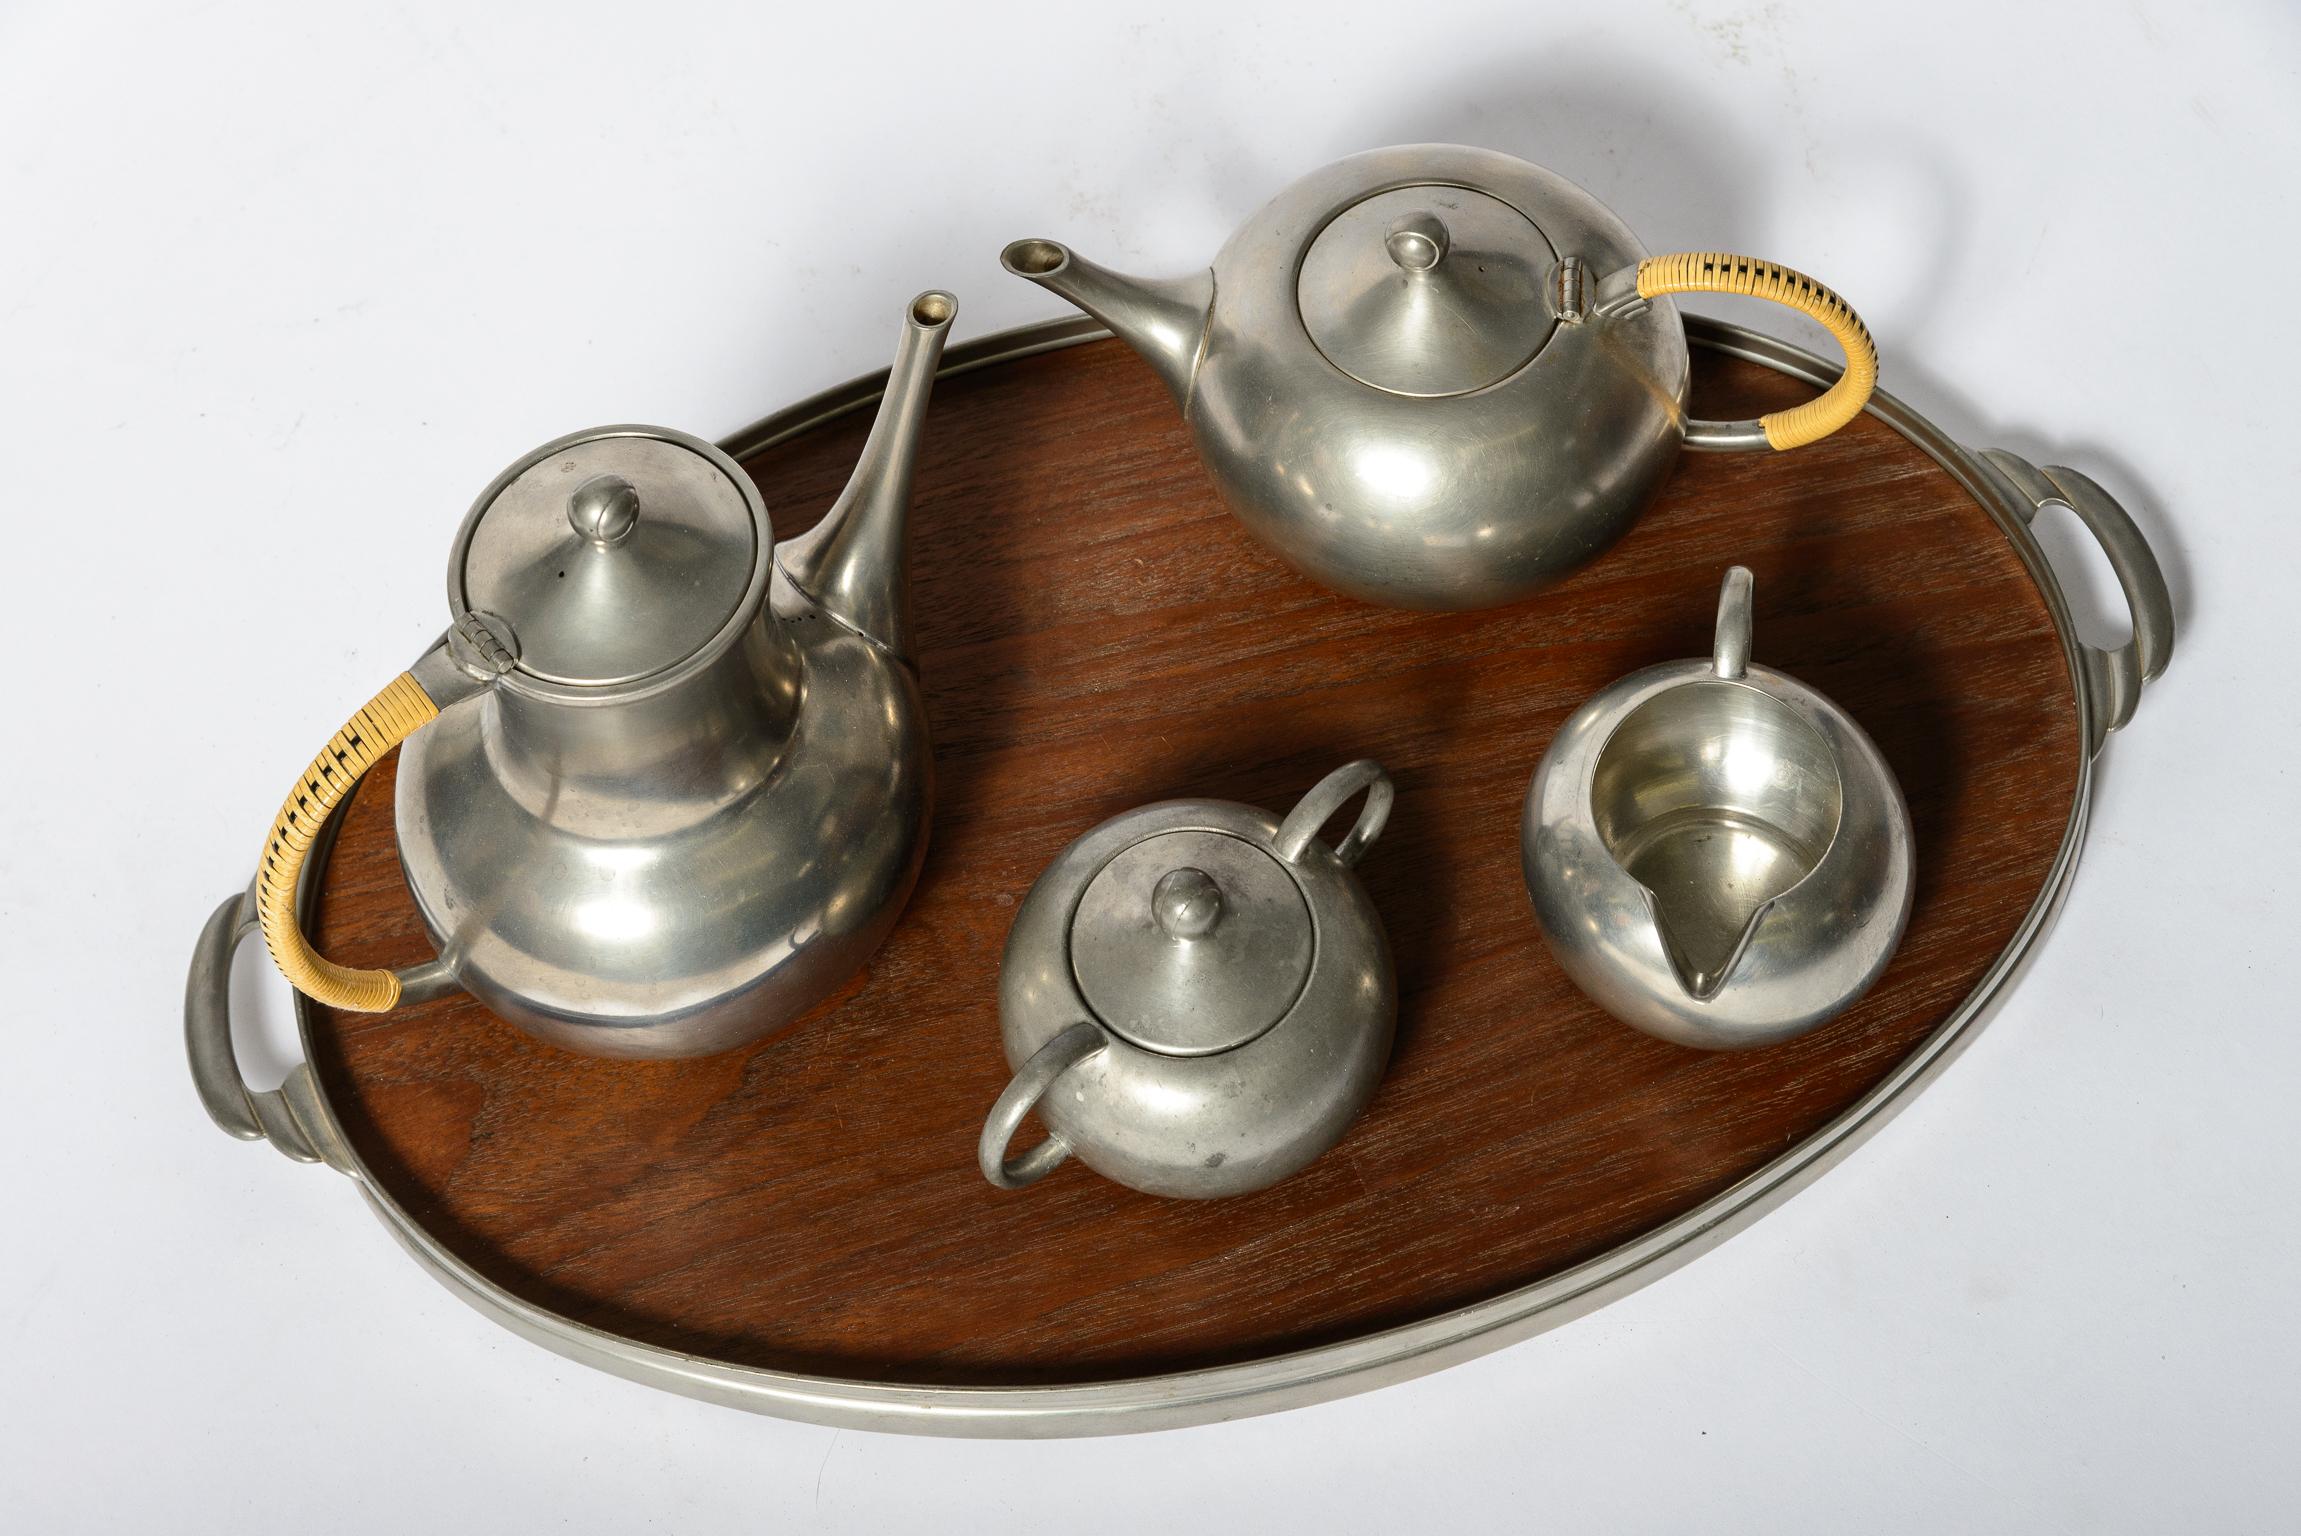 An original and complete Tea Set
Pewter, Cane and Walnut
Marked on underside